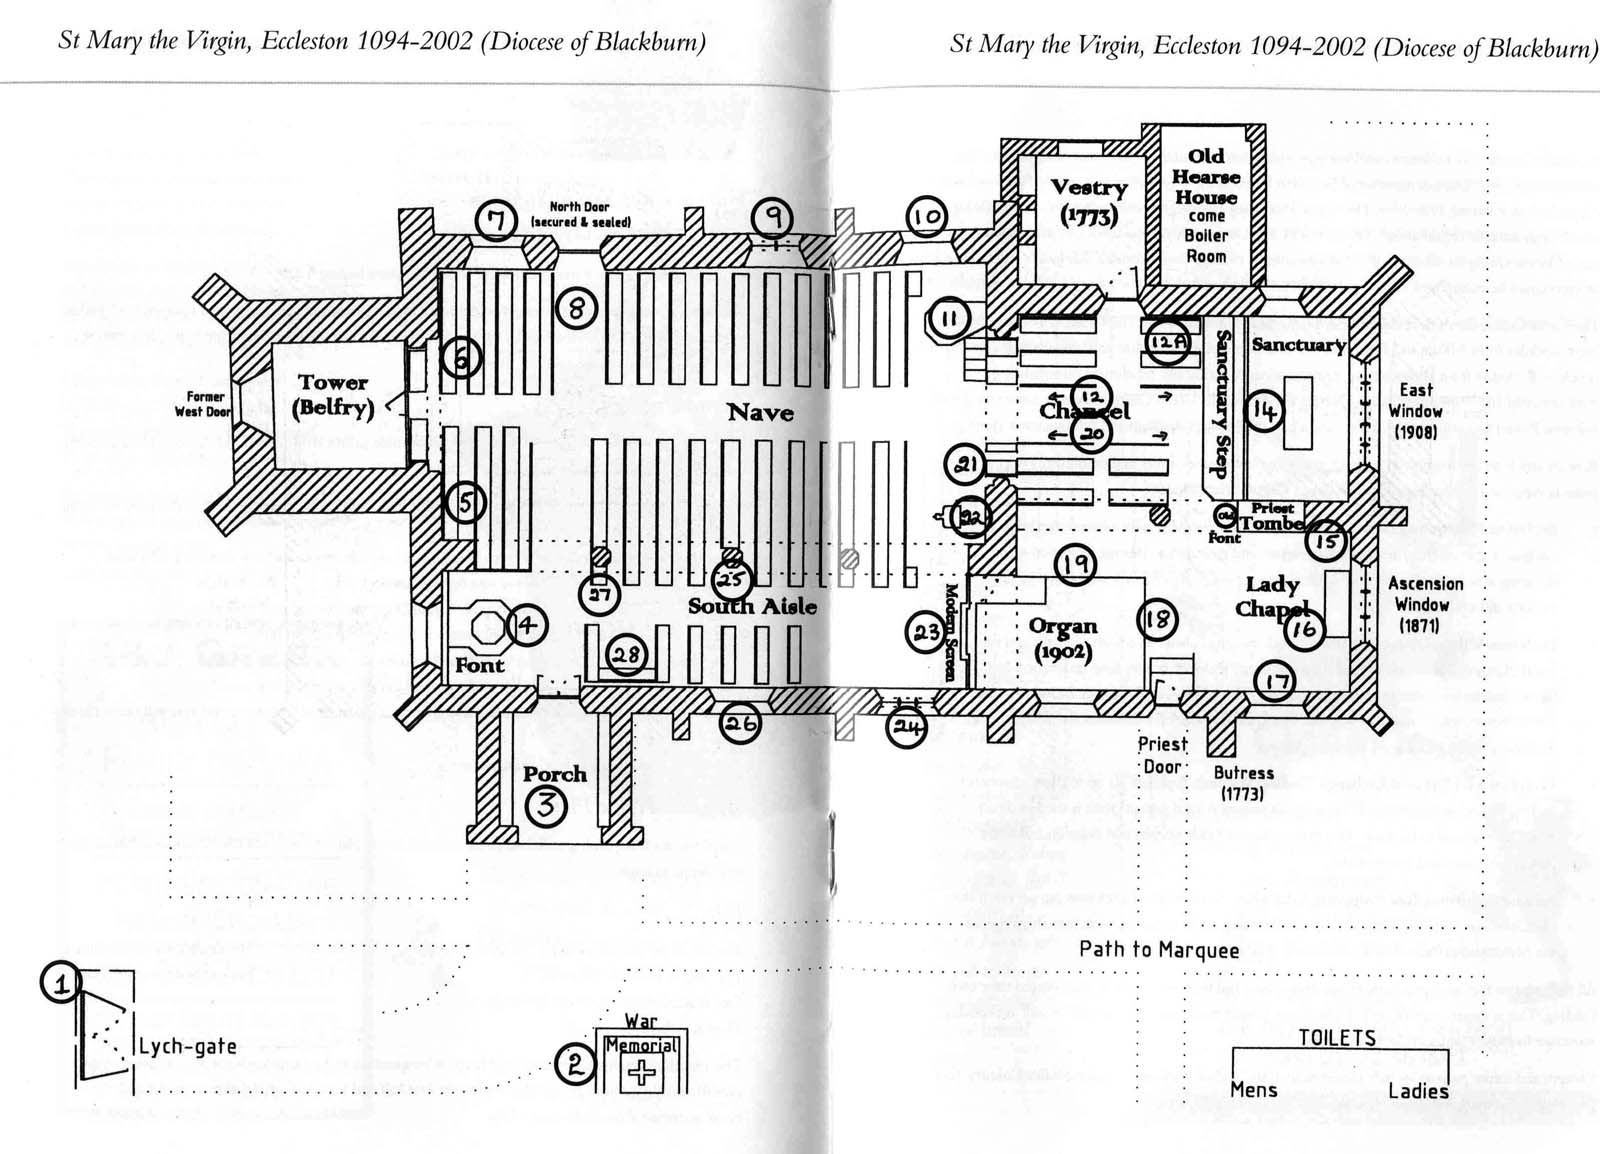 Plan of the Church of St Mary<br>Source: Flower Festival plan